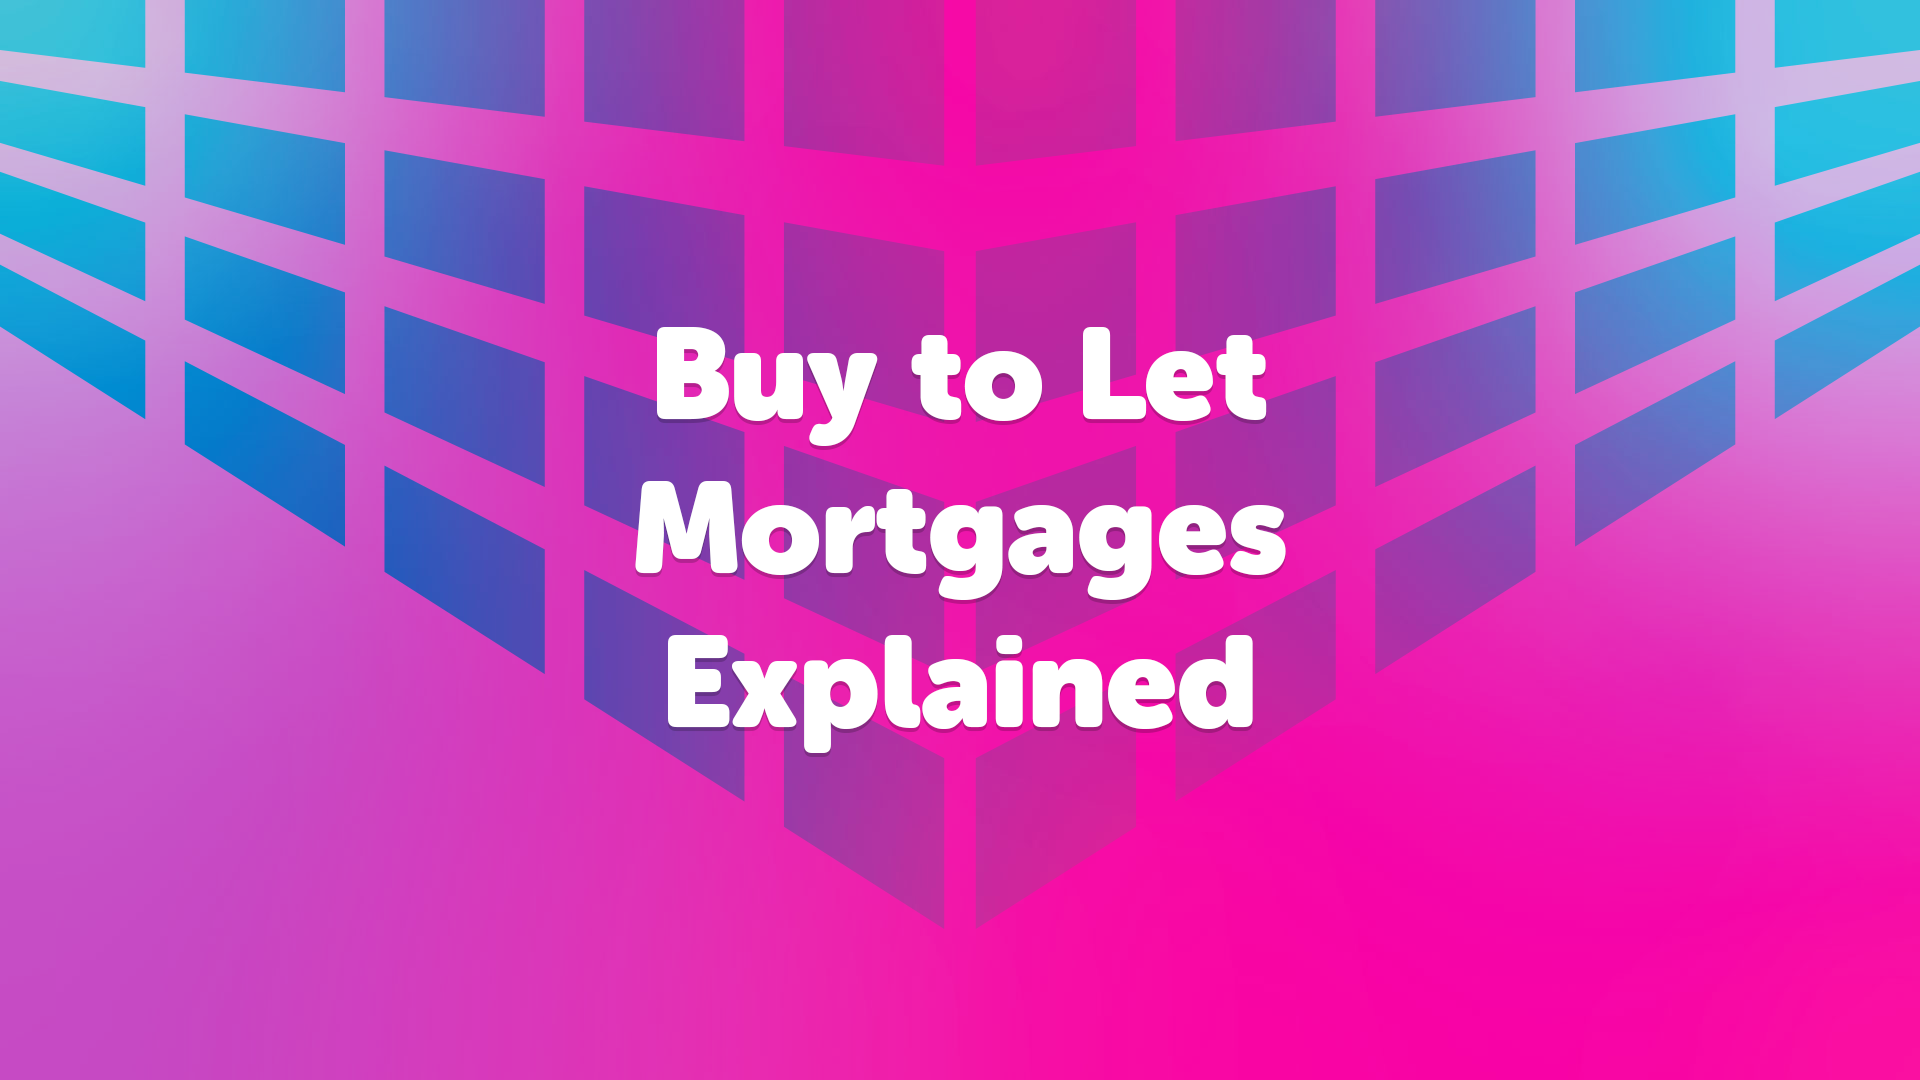 Buy to Let Mortgages Explained | Buy to Let Mortgage Advice | Mortgage Broker | UK Moneyman